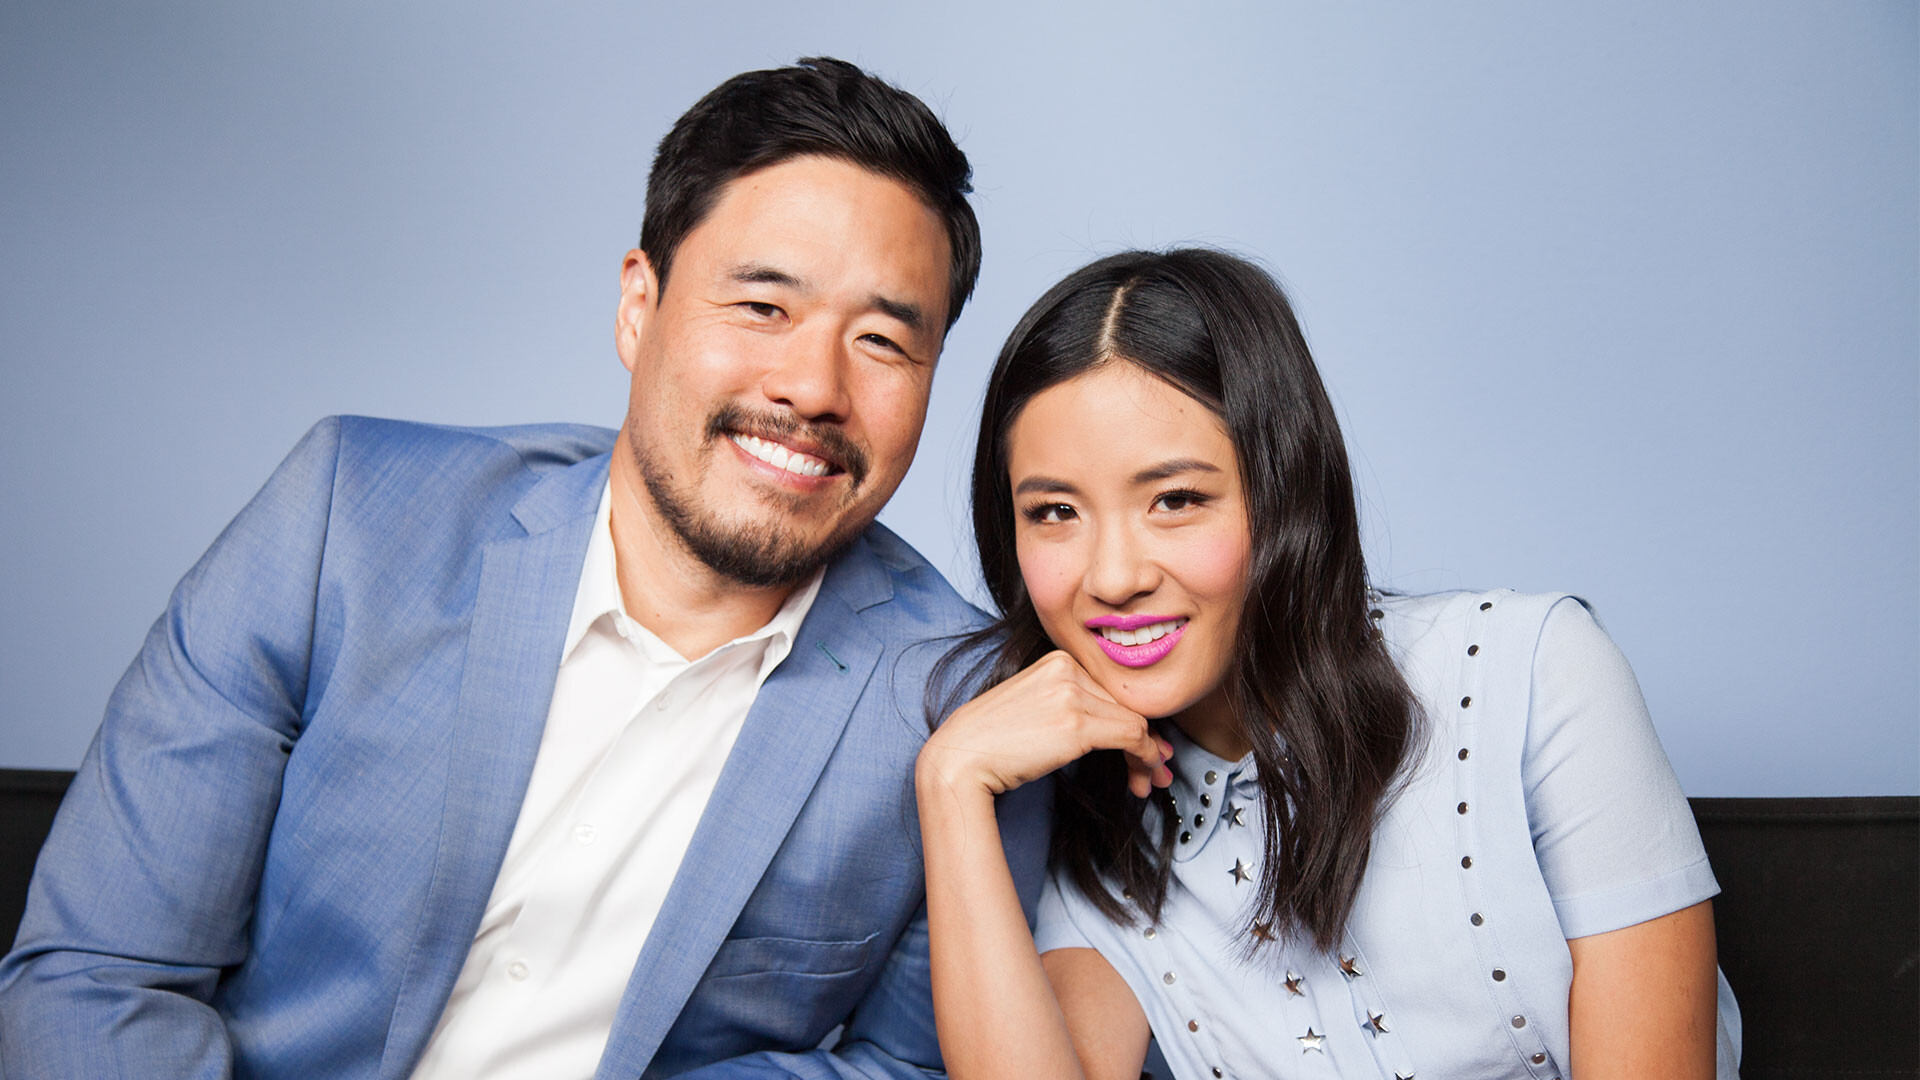 Randall Park: Fresh Off the Boat, An American television sitcom, ABC, Constance Wu, Playing the parents Hudson and Jessica Huang. 1920x1080 Full HD Wallpaper.